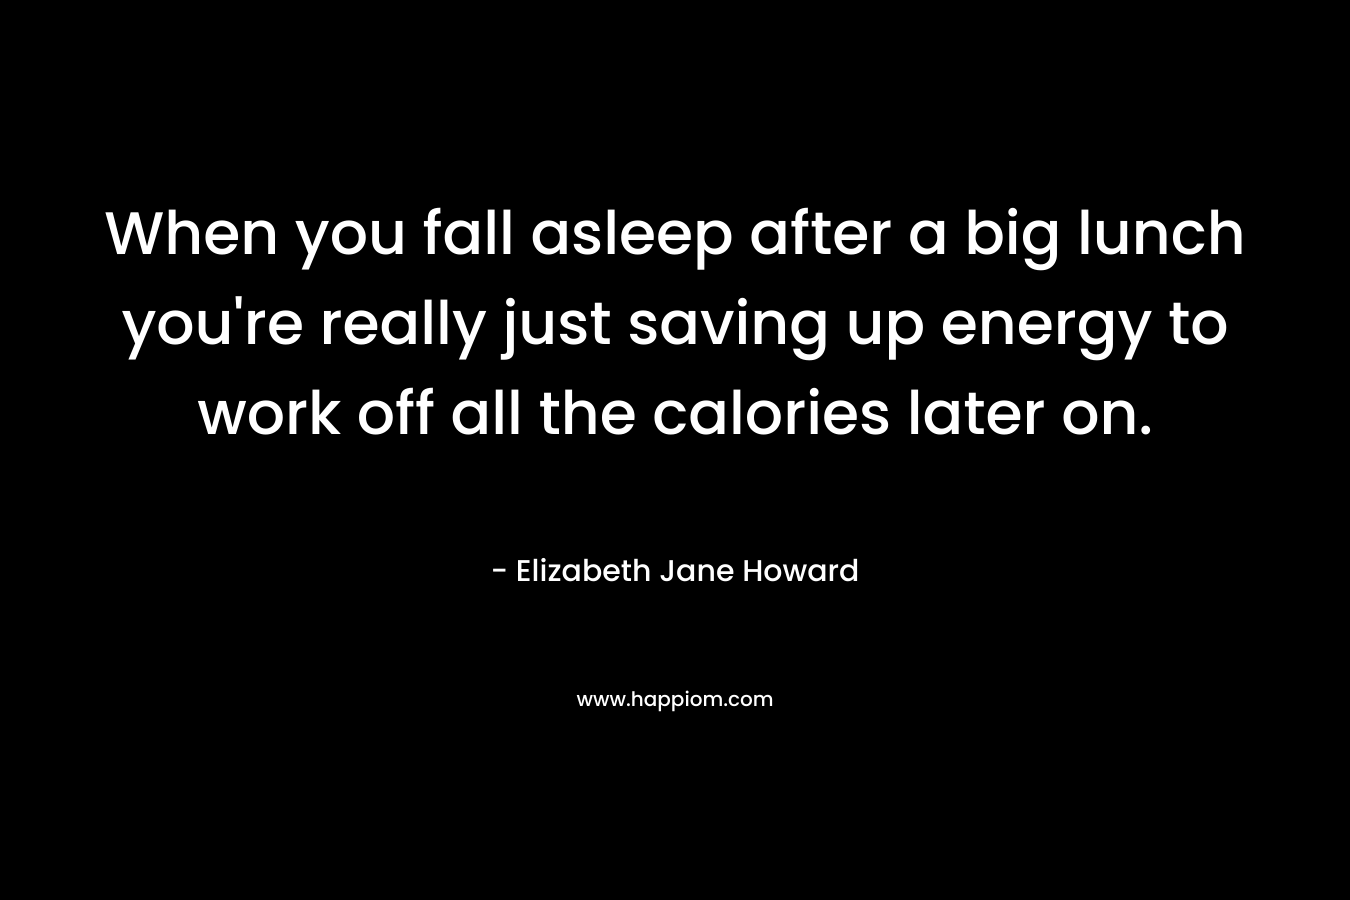 When you fall asleep after a big lunch you’re really just saving up energy to work off all the calories later on. – Elizabeth Jane Howard